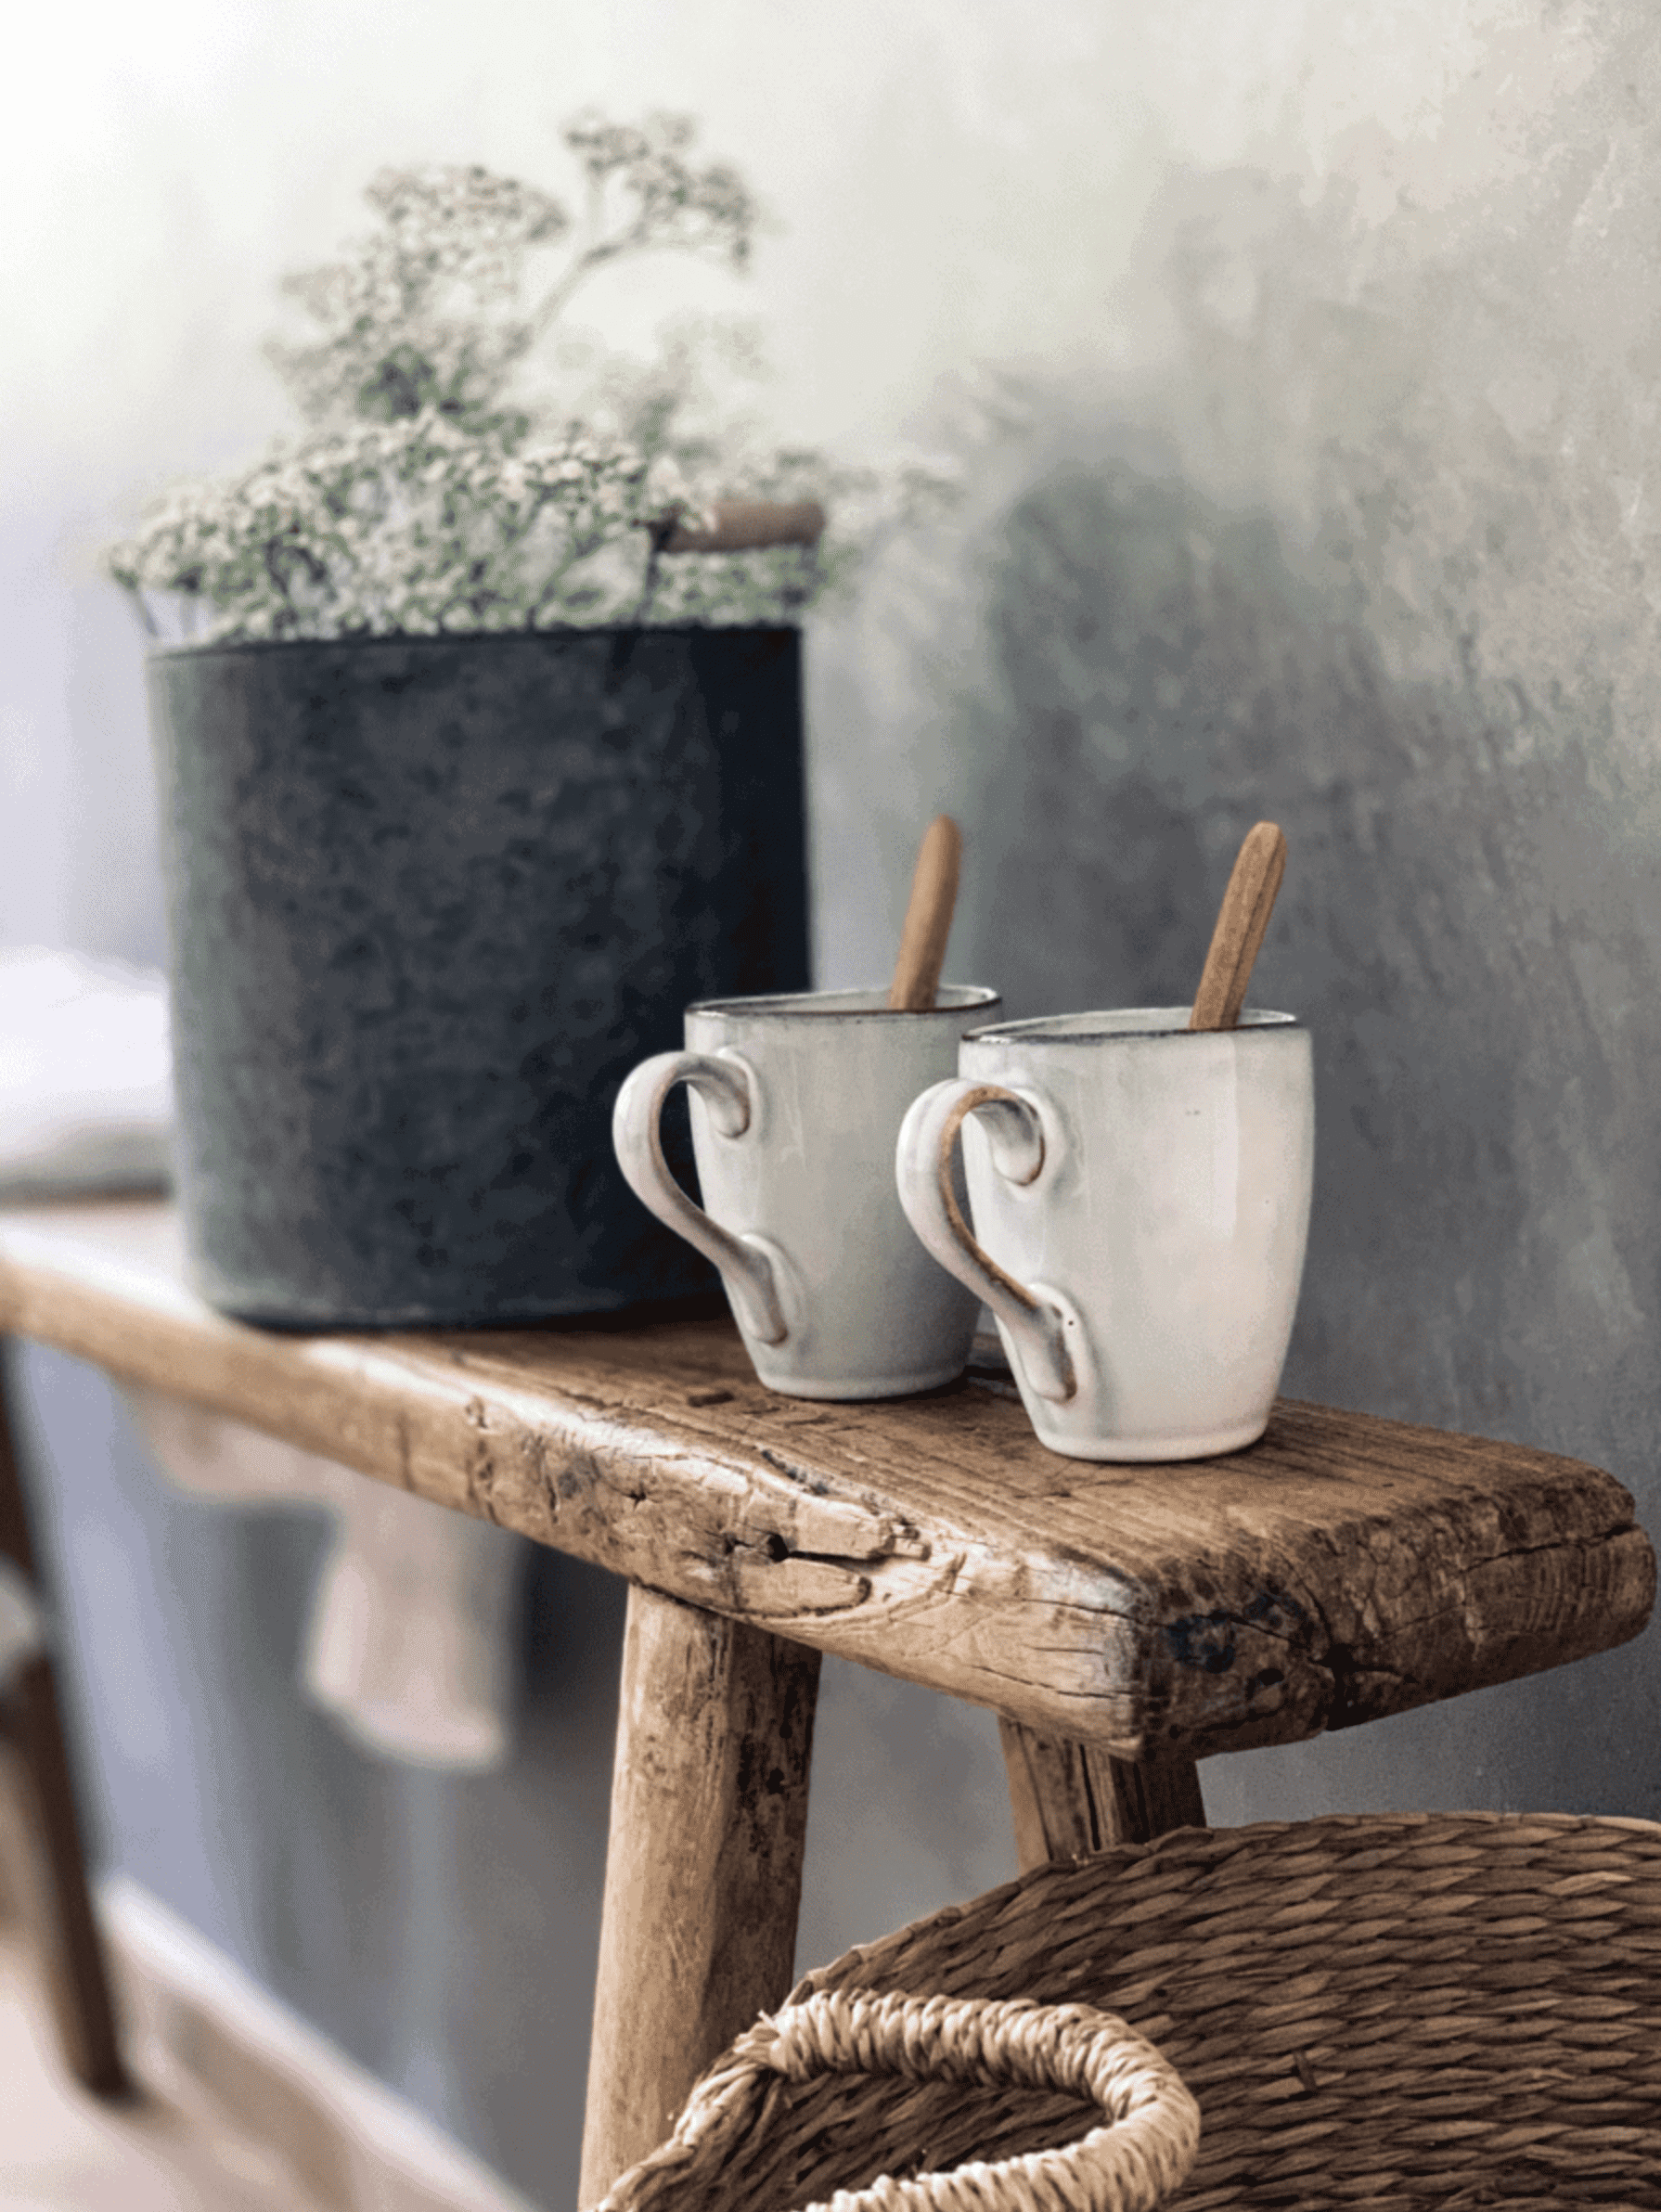 Crafted from the highest quality ceramics, featuring an exquisite rustic Scandinavian design, and boasting an impeccable finish. The Nordic Sand mugs exhibit a captivating creamy hue adorned with delicate sandy specks that grace the entirety of the glaze.